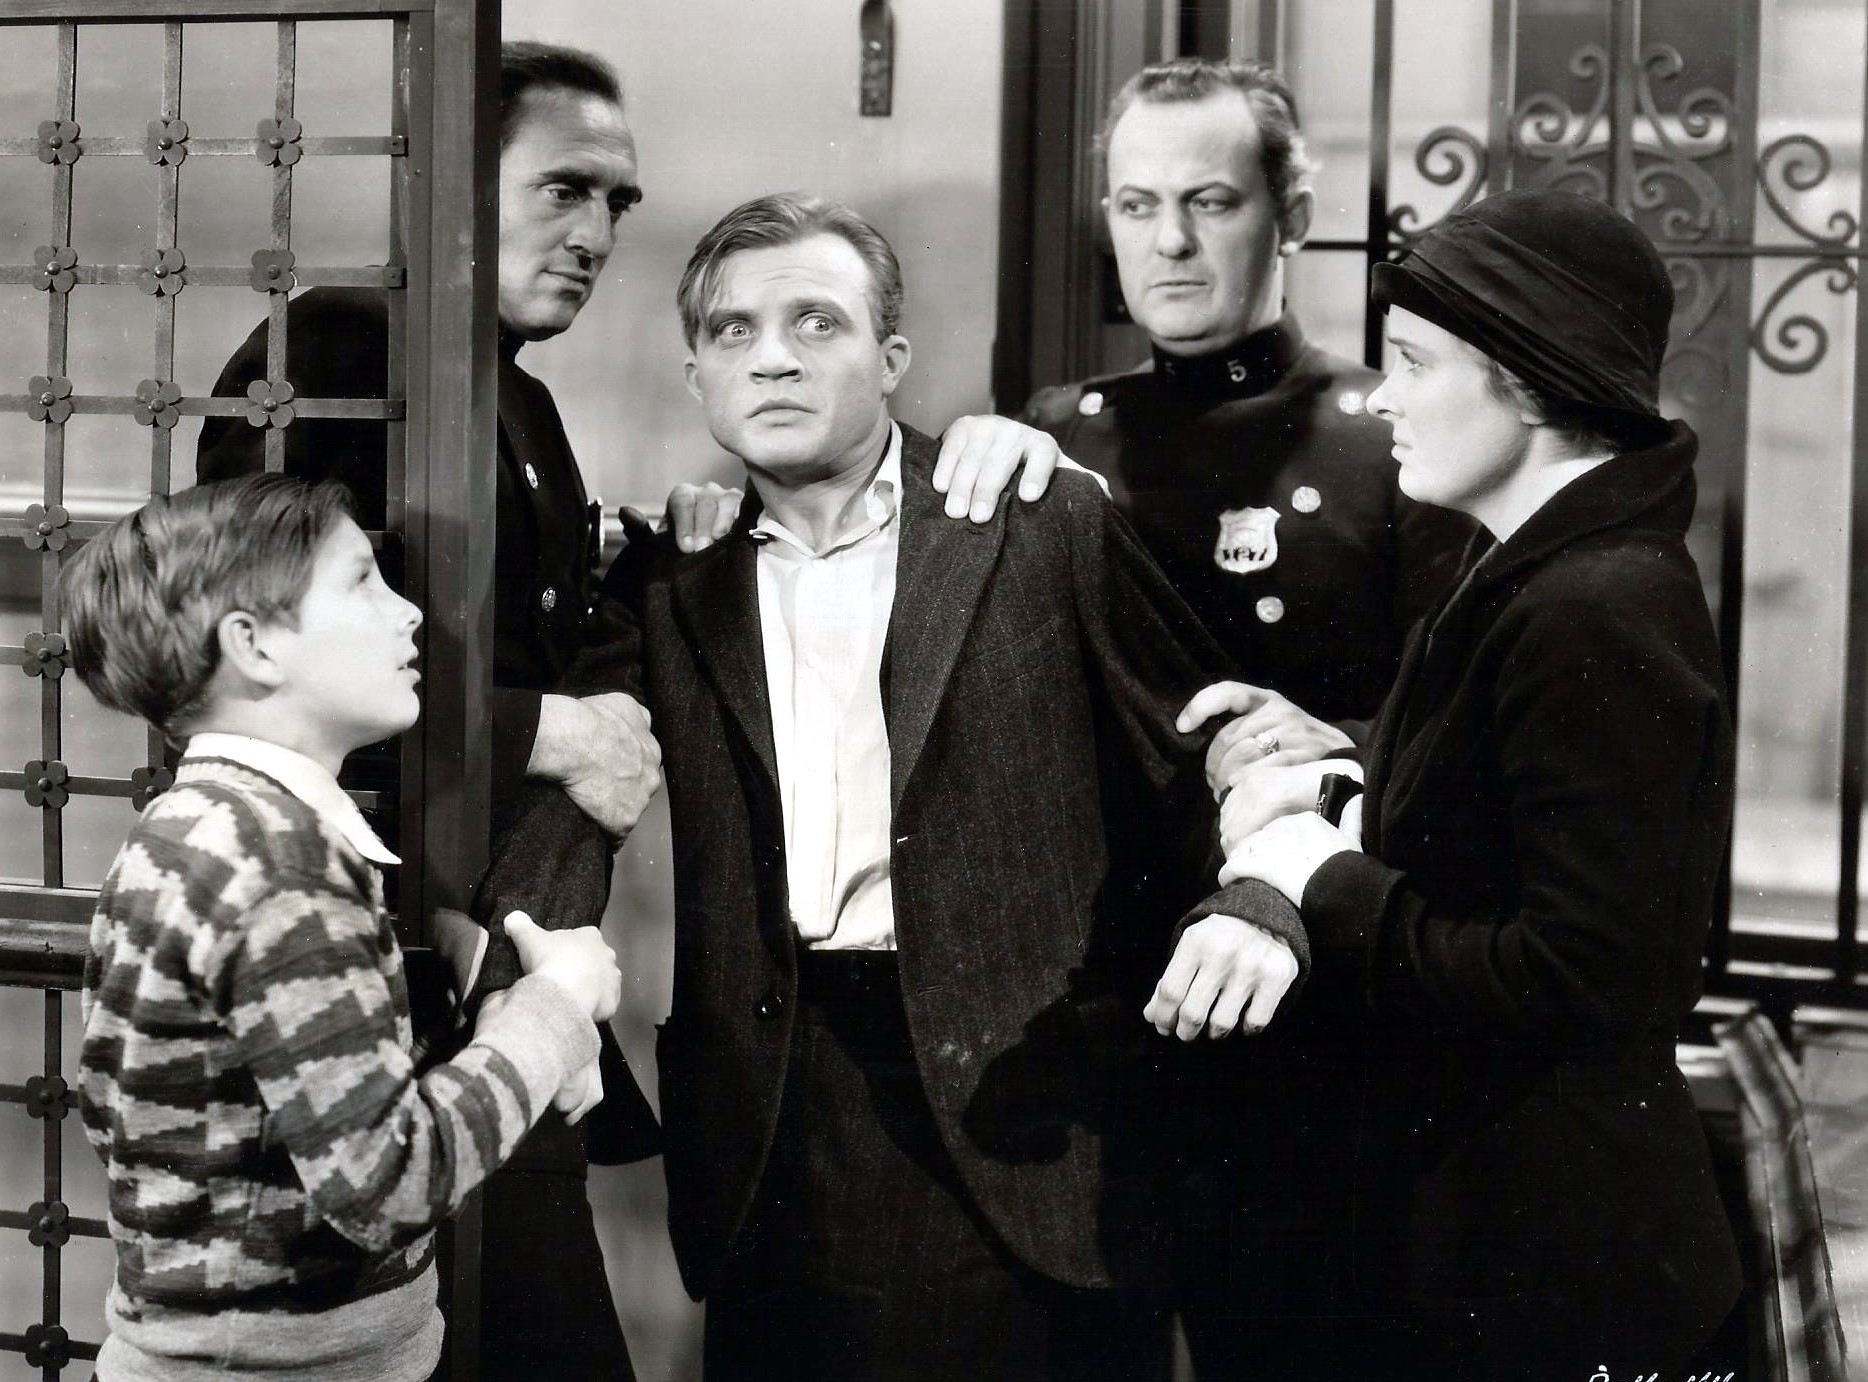 Attorney for the Defense (1932) Screenshot 2